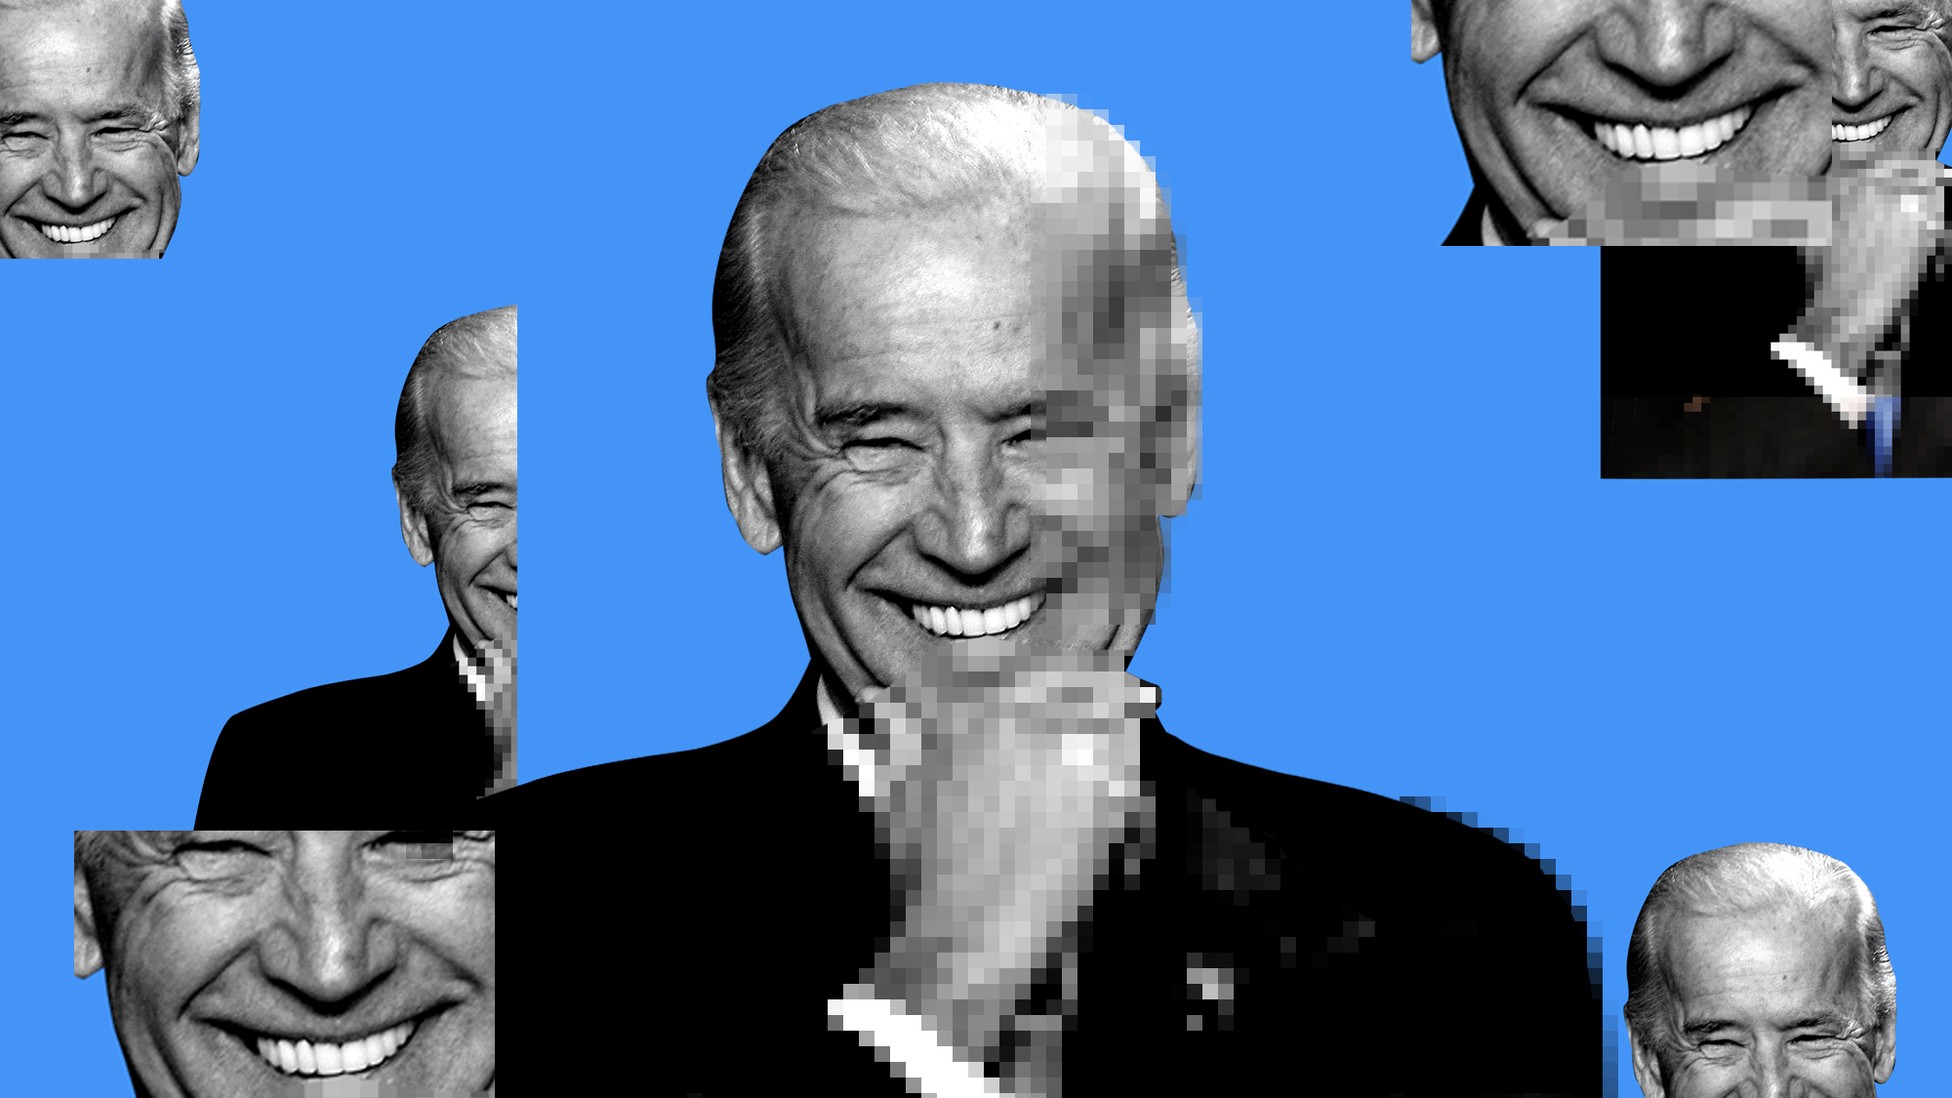 Biden's Virtual Campaign Is a Disaster - The Atlantic